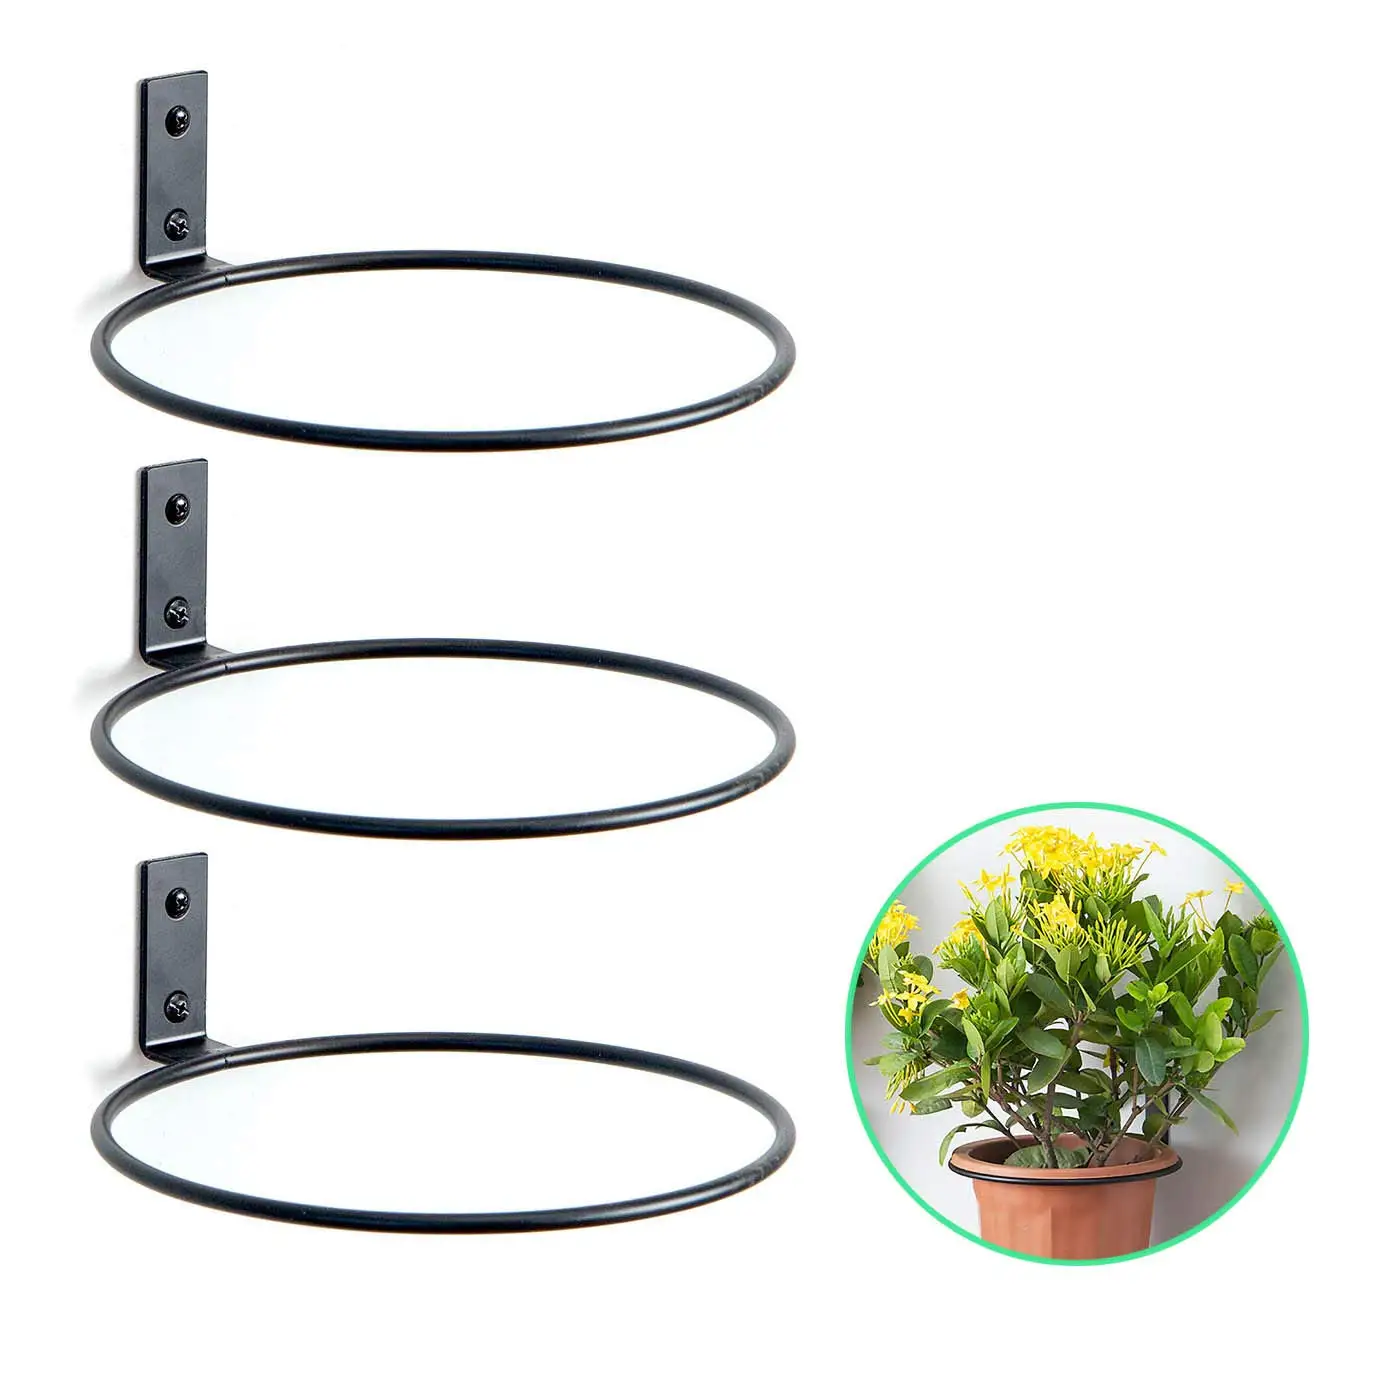 https://ae01.alicdn.com/kf/S3333c98d2cca4ceea03476e87596ab8bk/4-6-8in-Plant-Holder-Ring-Wall-Mounted-Metal-Flower-Pot-Collapsible-Bracket-for-Balcony-Home.jpg